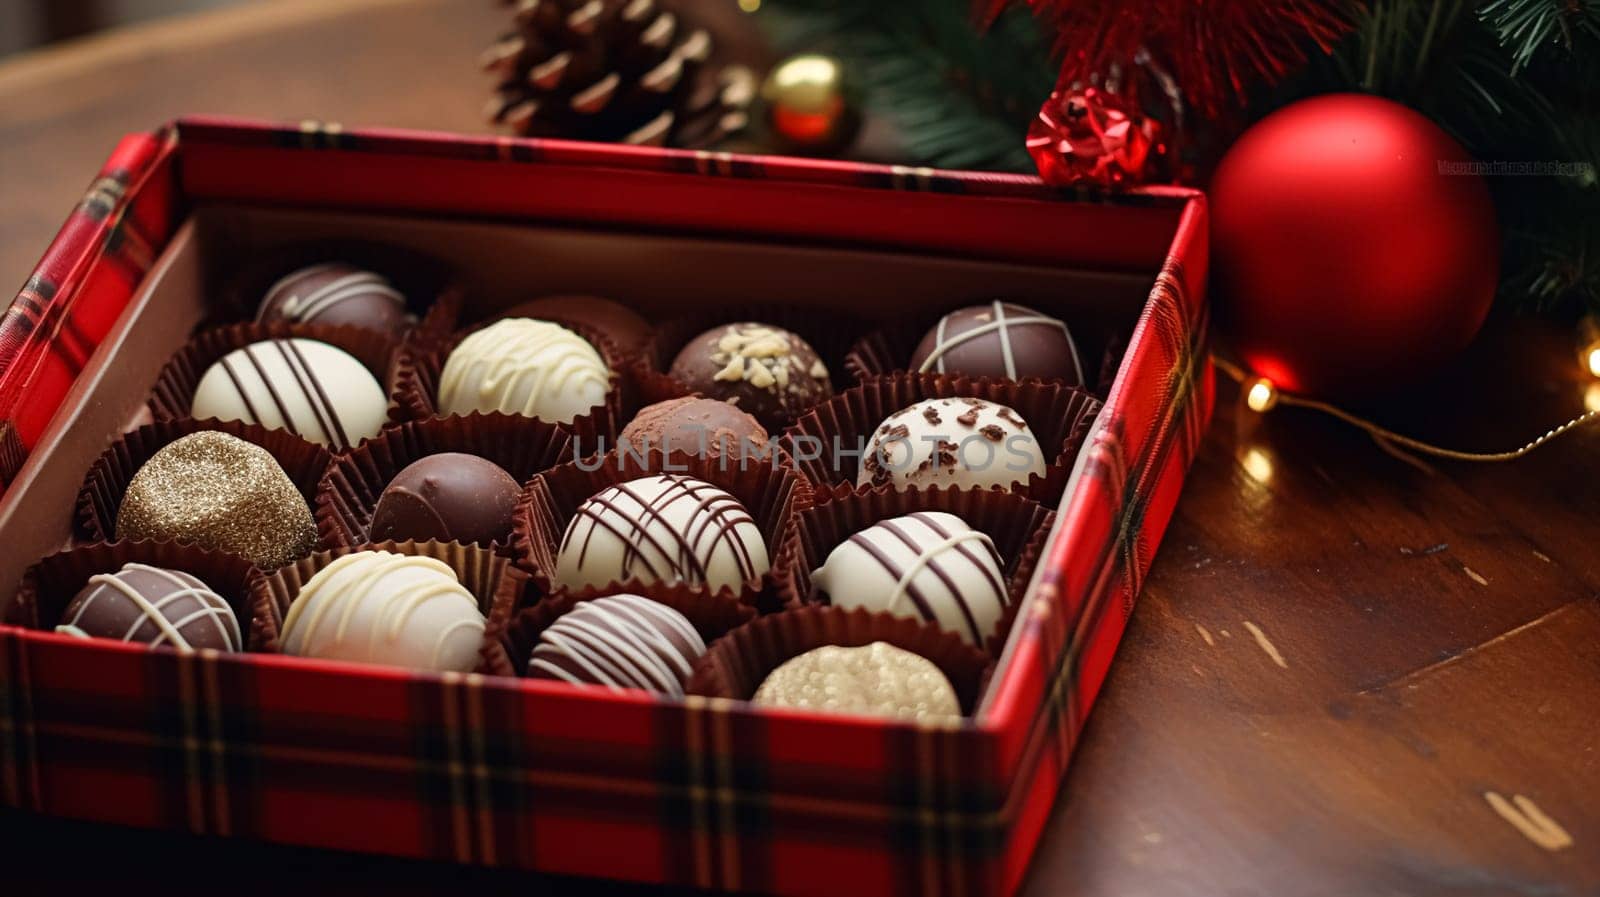 Christmas present, holidays and celebration, box of chocolate pralines, winter holiday gift idea